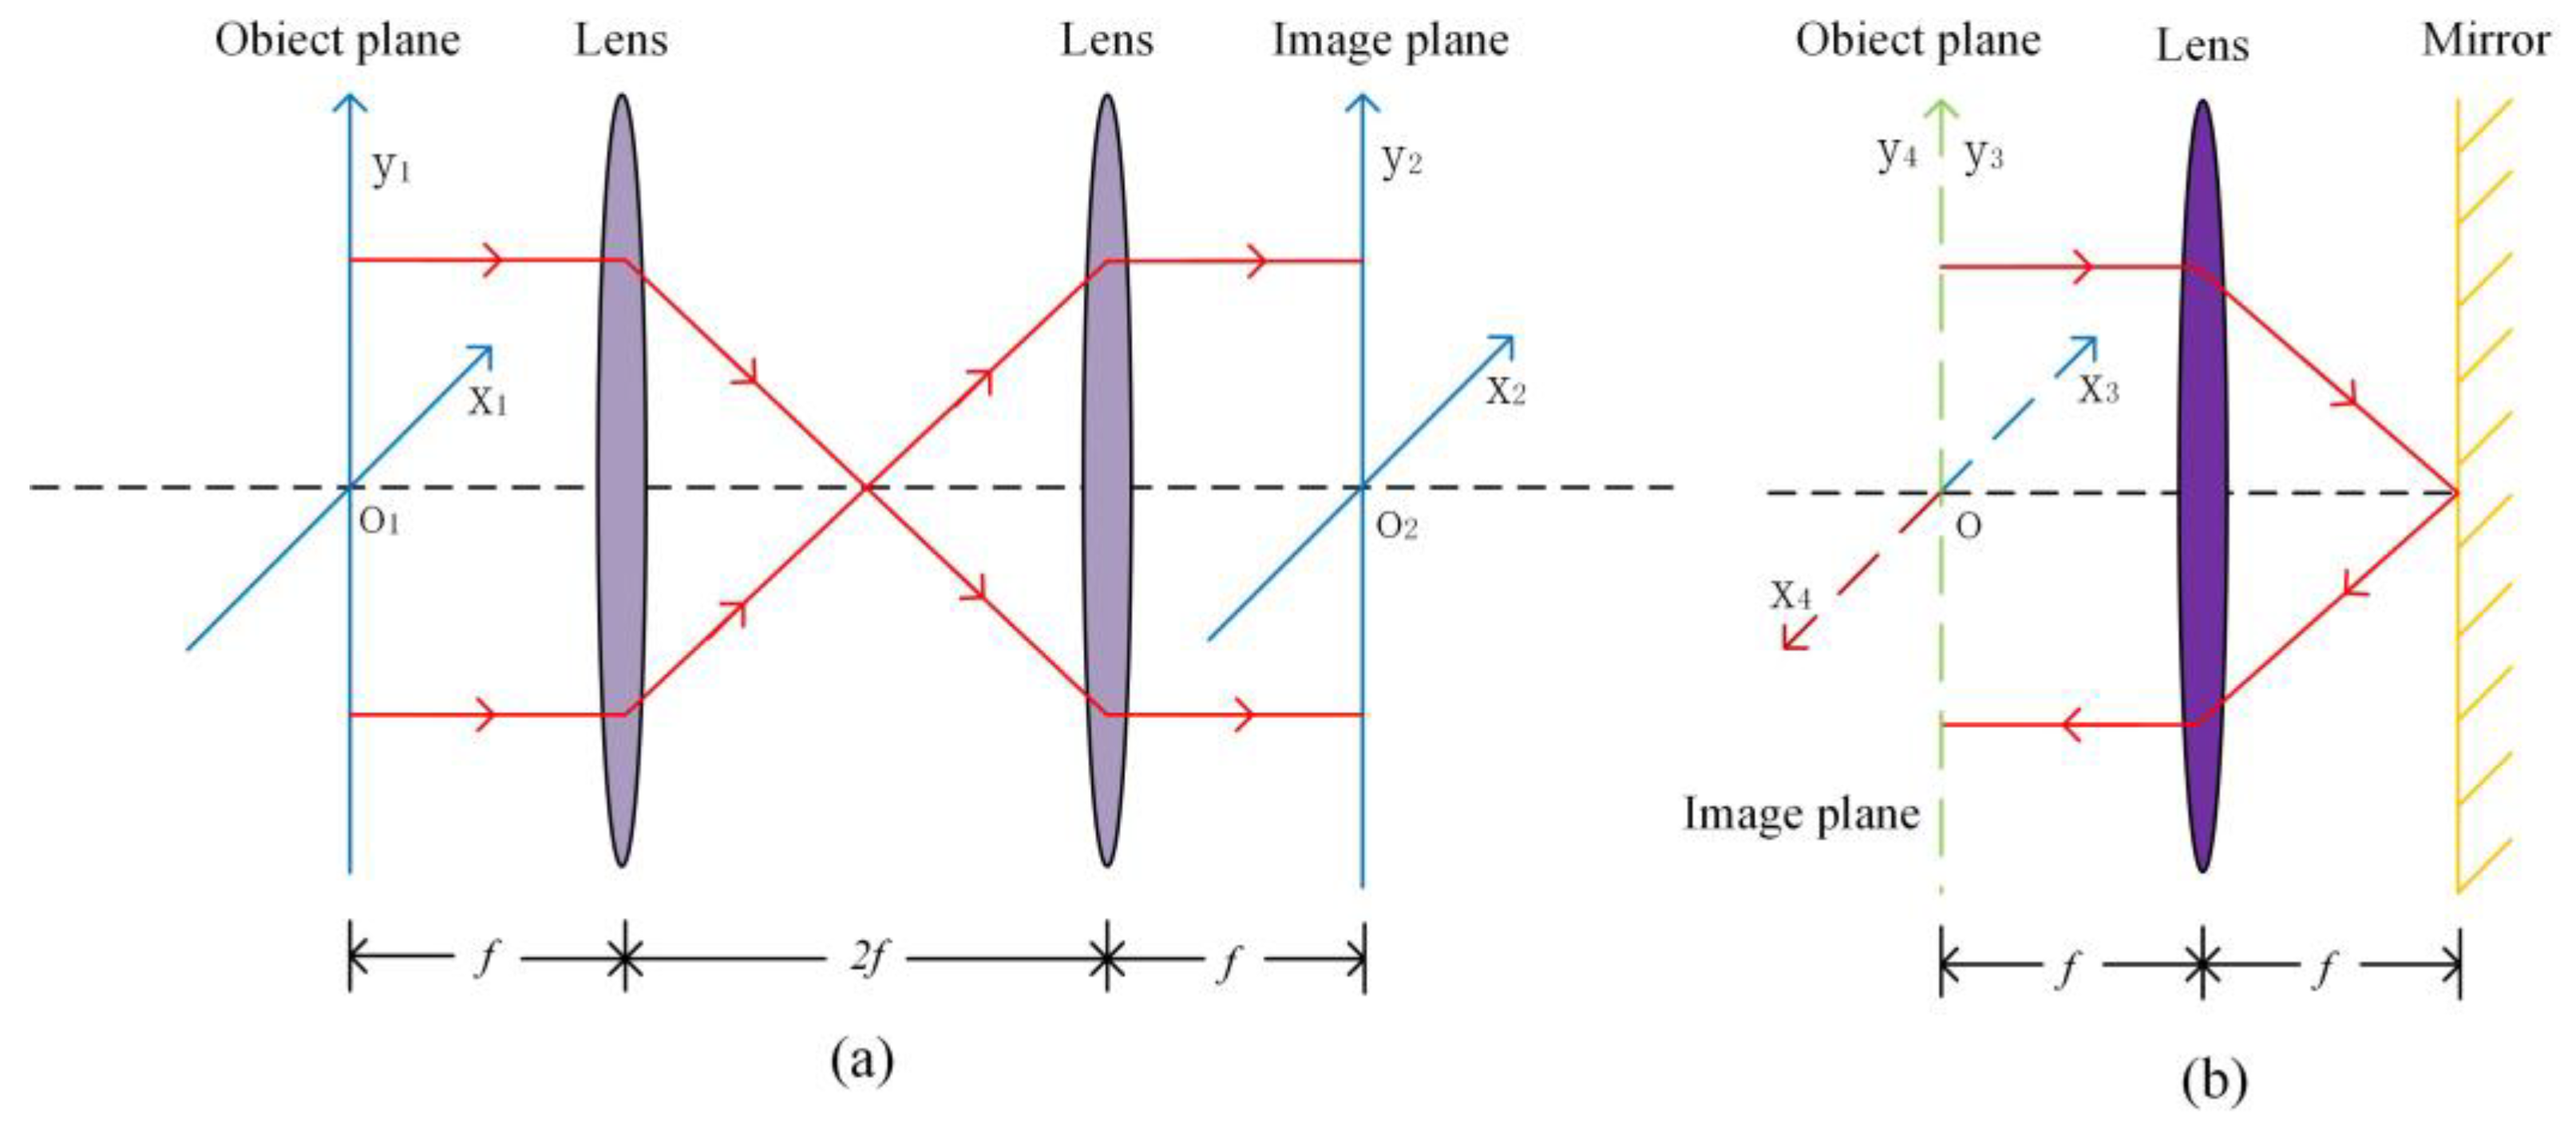 Photonics | Free Full-Text | Optimization of Longitudinal Alignment of an 4f  System in a Compact Vectorial Optical-Field Generator Based on a  High-Resolution Liquid Crystal Spatial Light Modulator